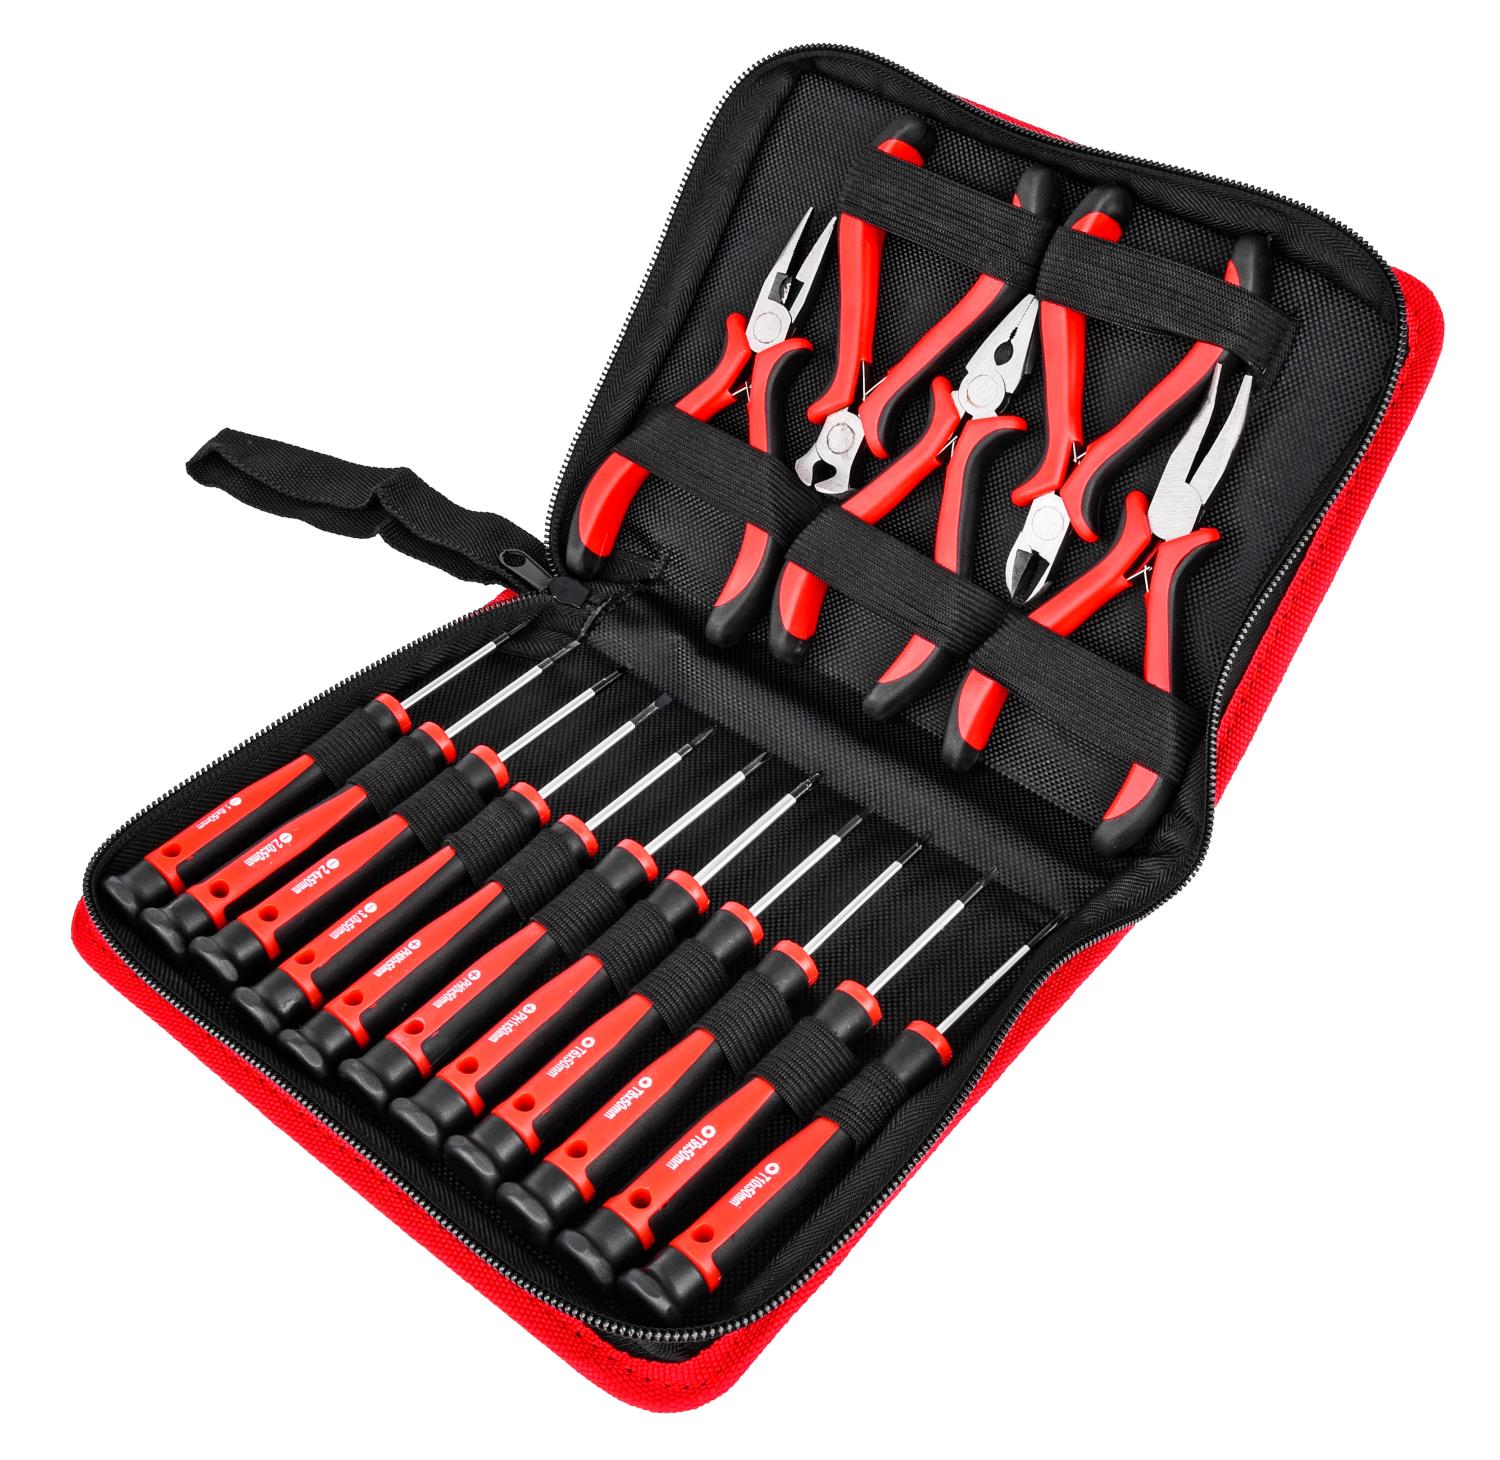 16-Piece Pliers & Precision Screwdrivers Tool Set with